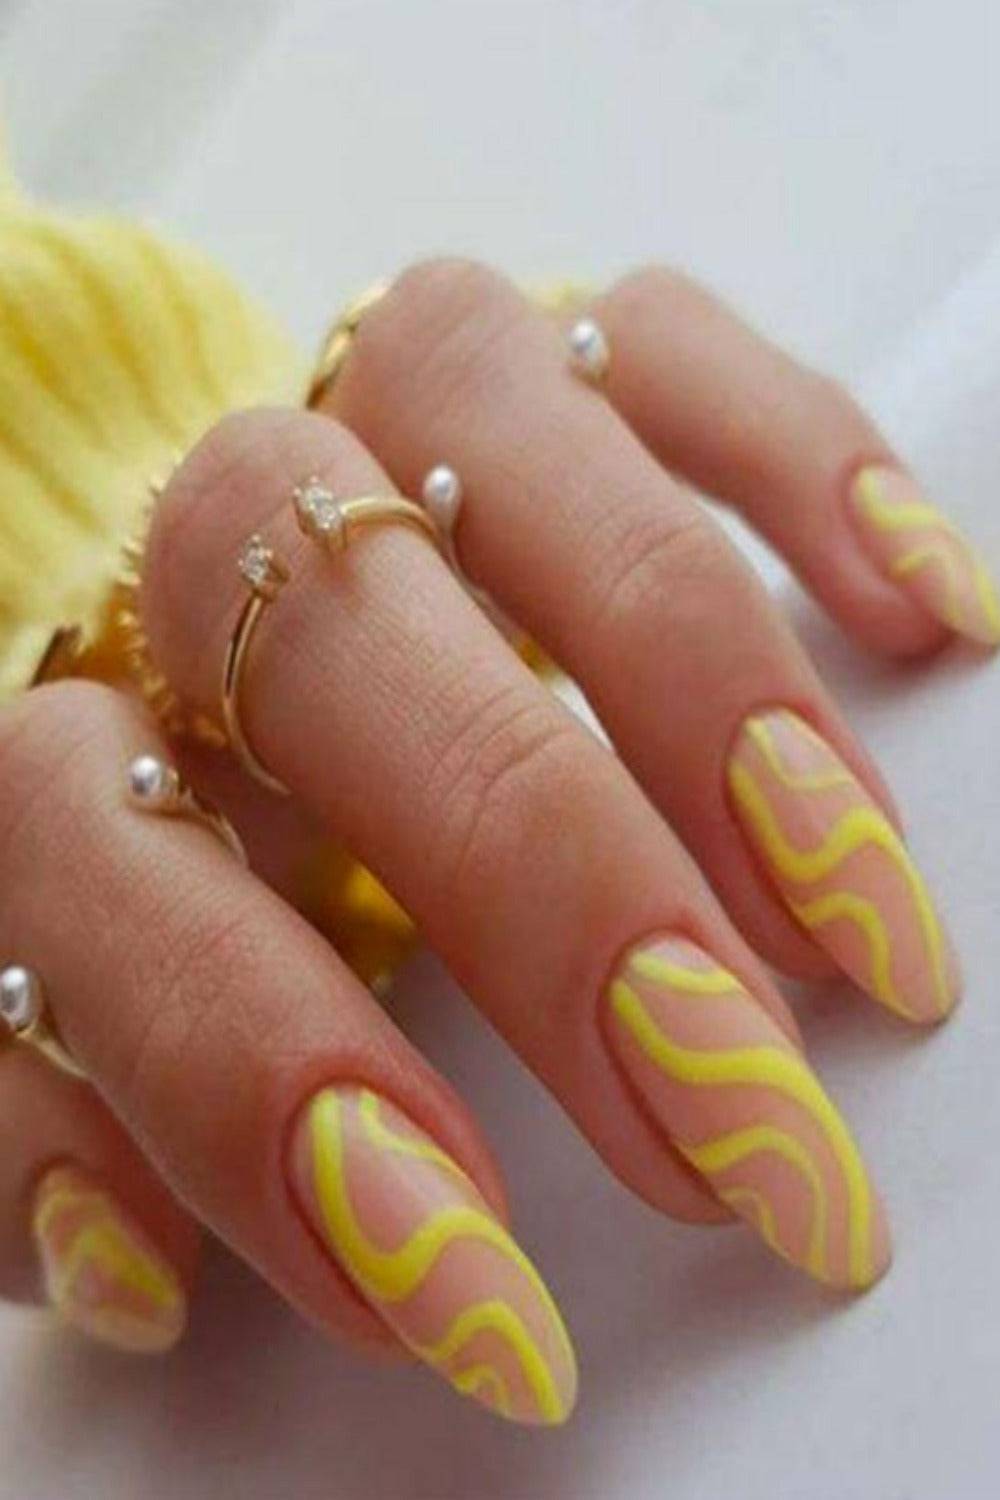 Yellow French Tip Wave Swirl Press On Nails Kit - TGC Boutique - Press On Nails